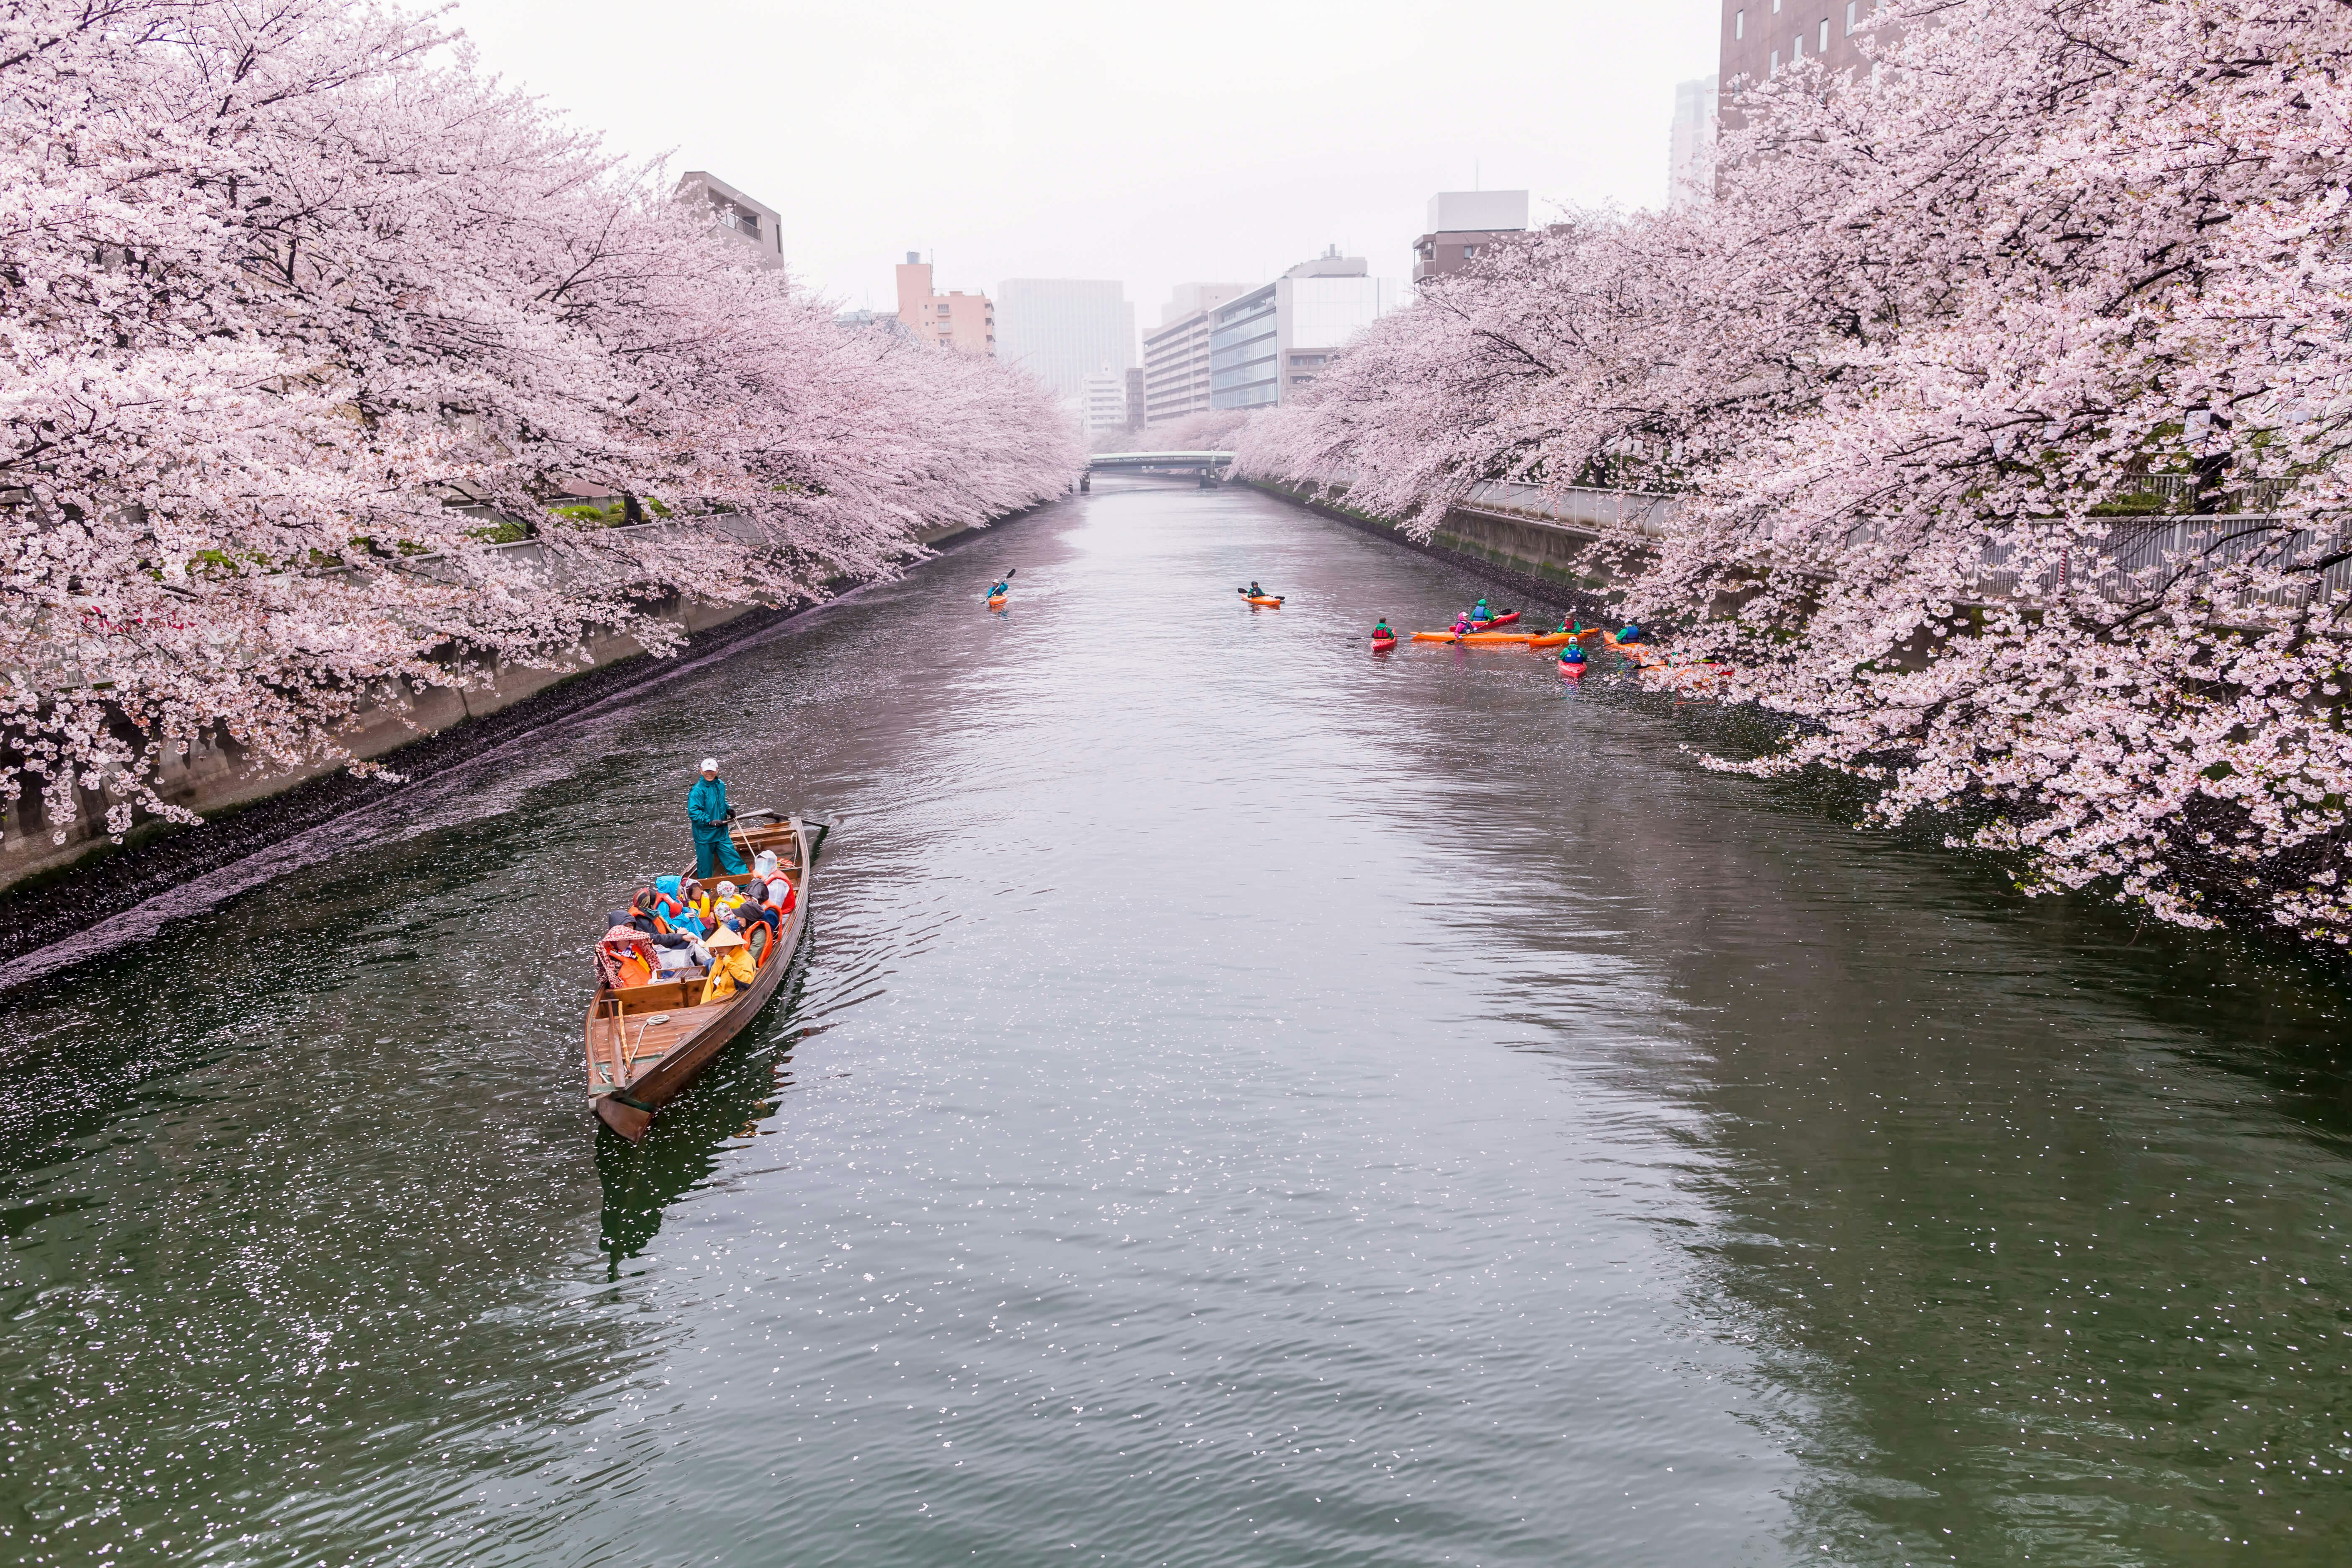 Tourists on a rainy day in spring on a boat rowing along on the Sumida River with cherry blossoms in full bloom on both sides of the river bank  